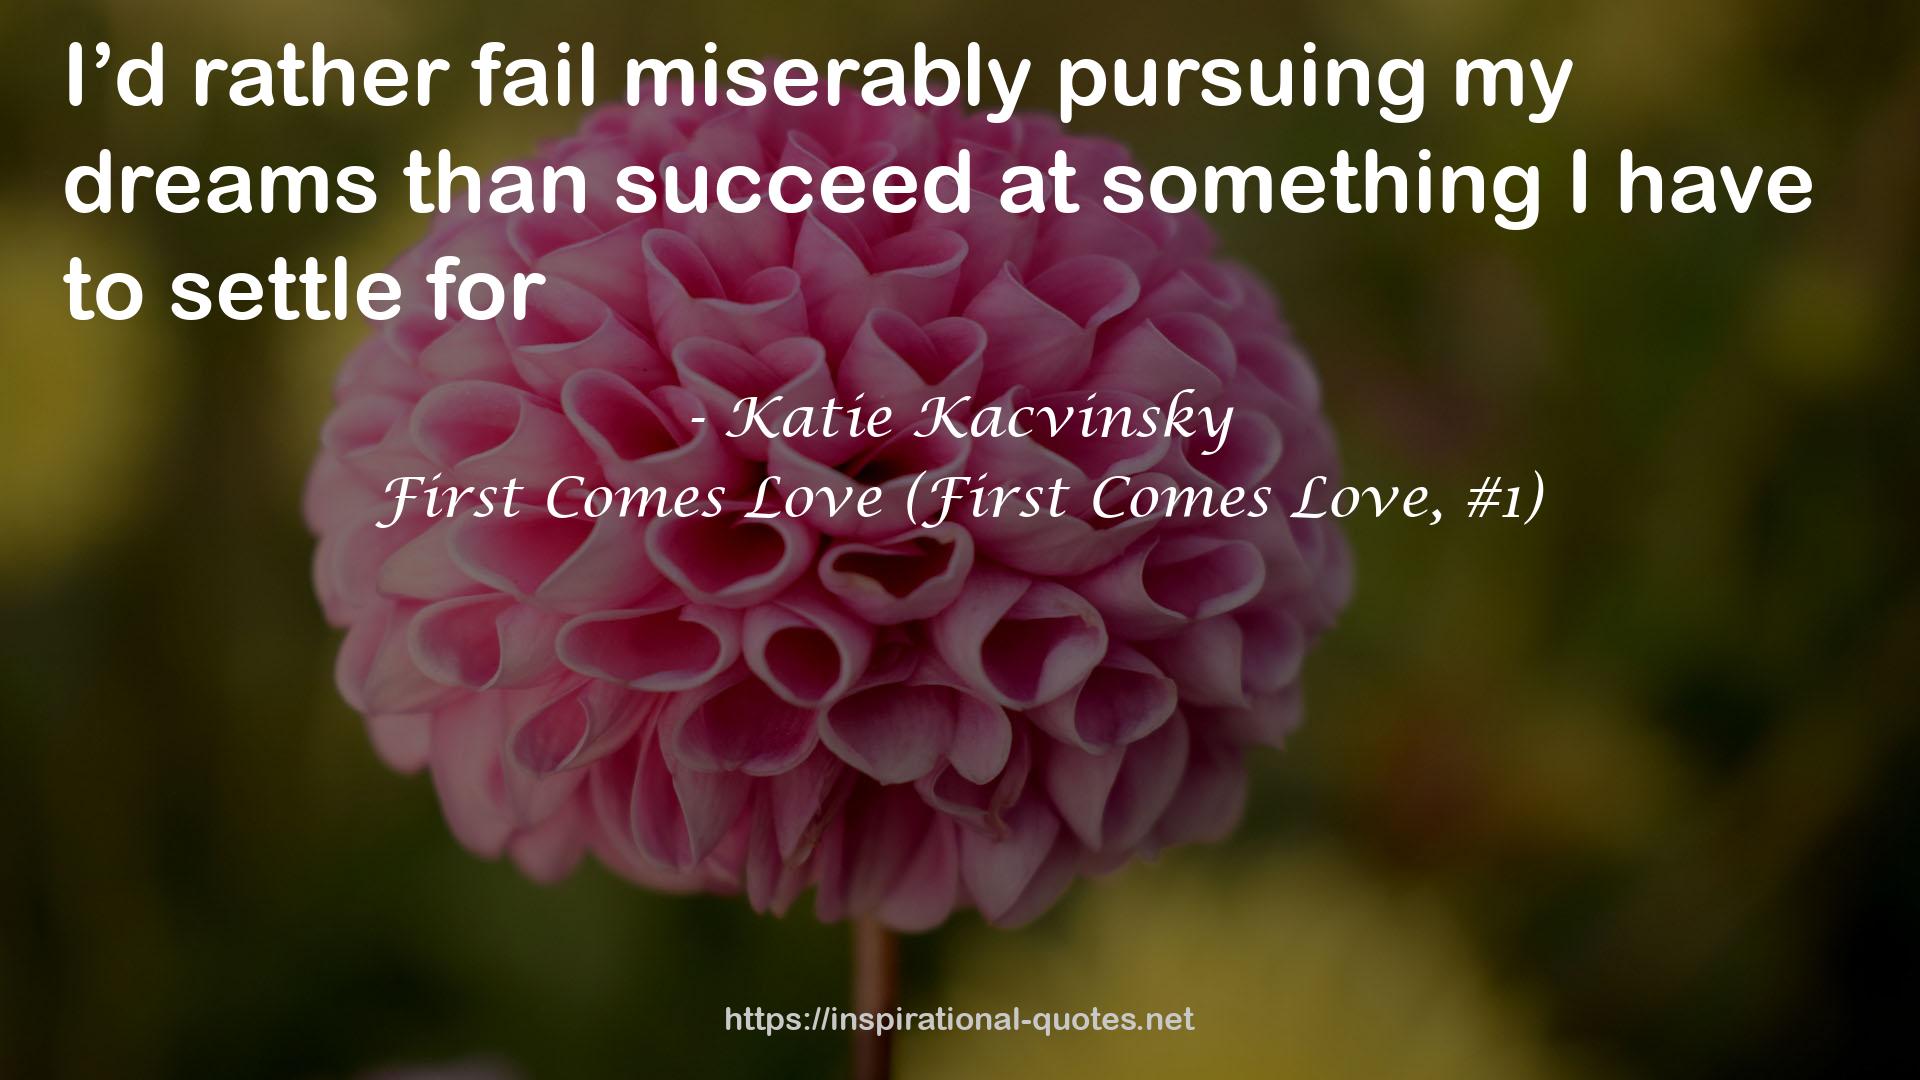 First Comes Love (First Comes Love, #1) QUOTES